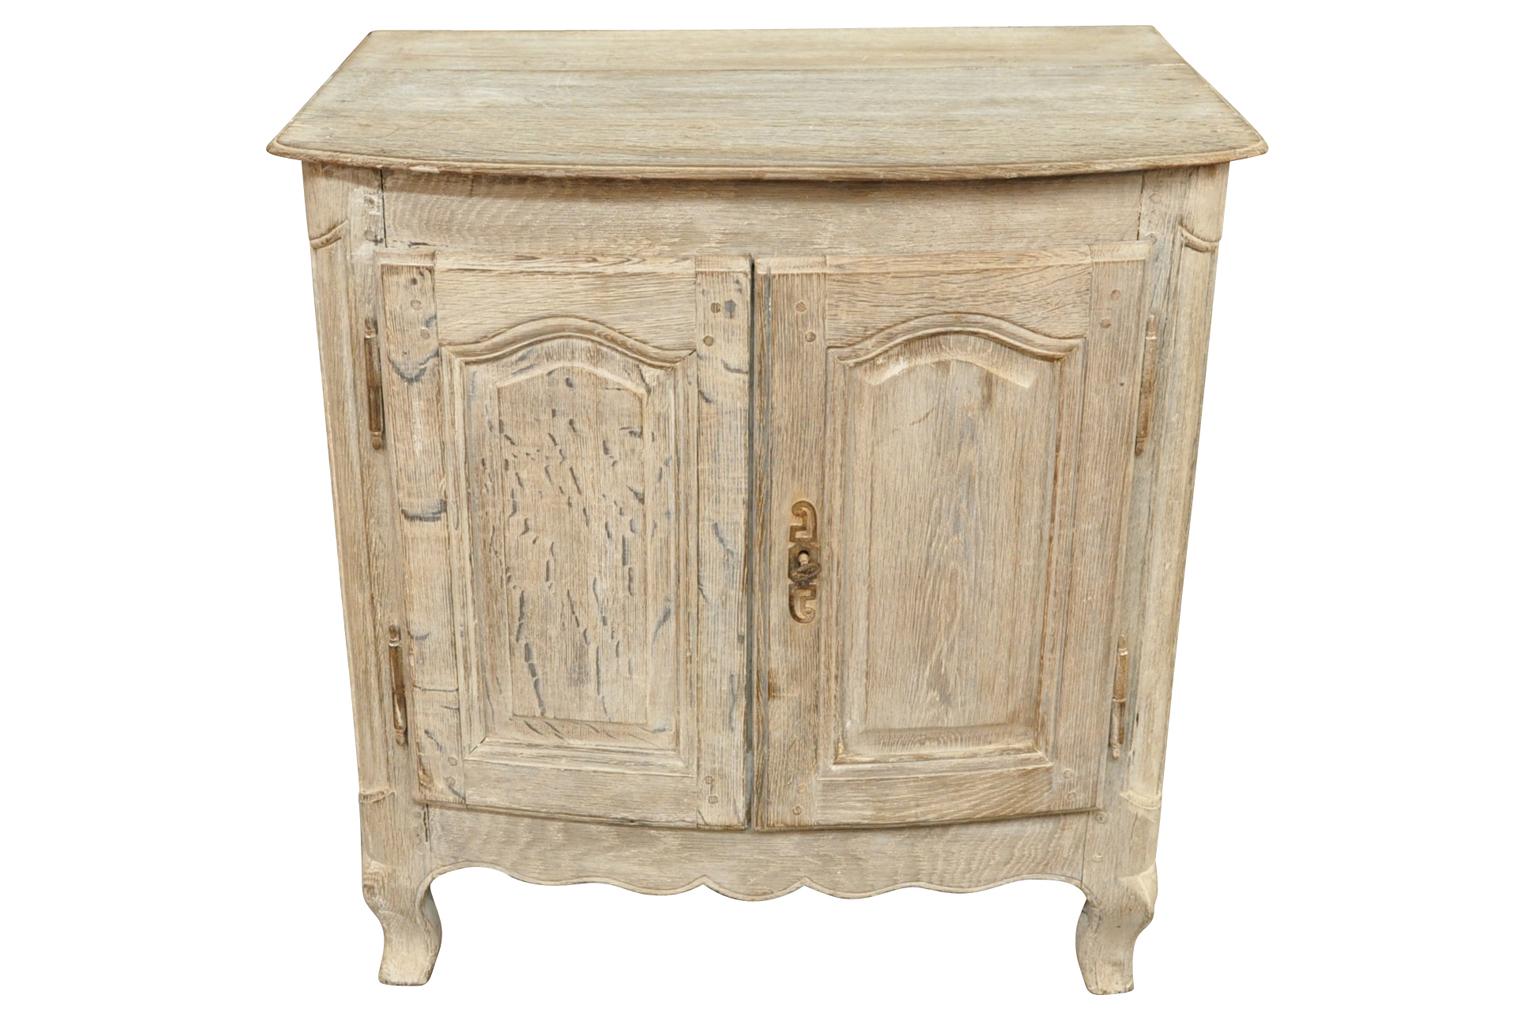 A very charming later 19th century Provencal petit buffet or side cabinet wonderfully constructed in bleached or washed oak. Perfect as a bedside cabinet or converted into a bath or powder room vanity.